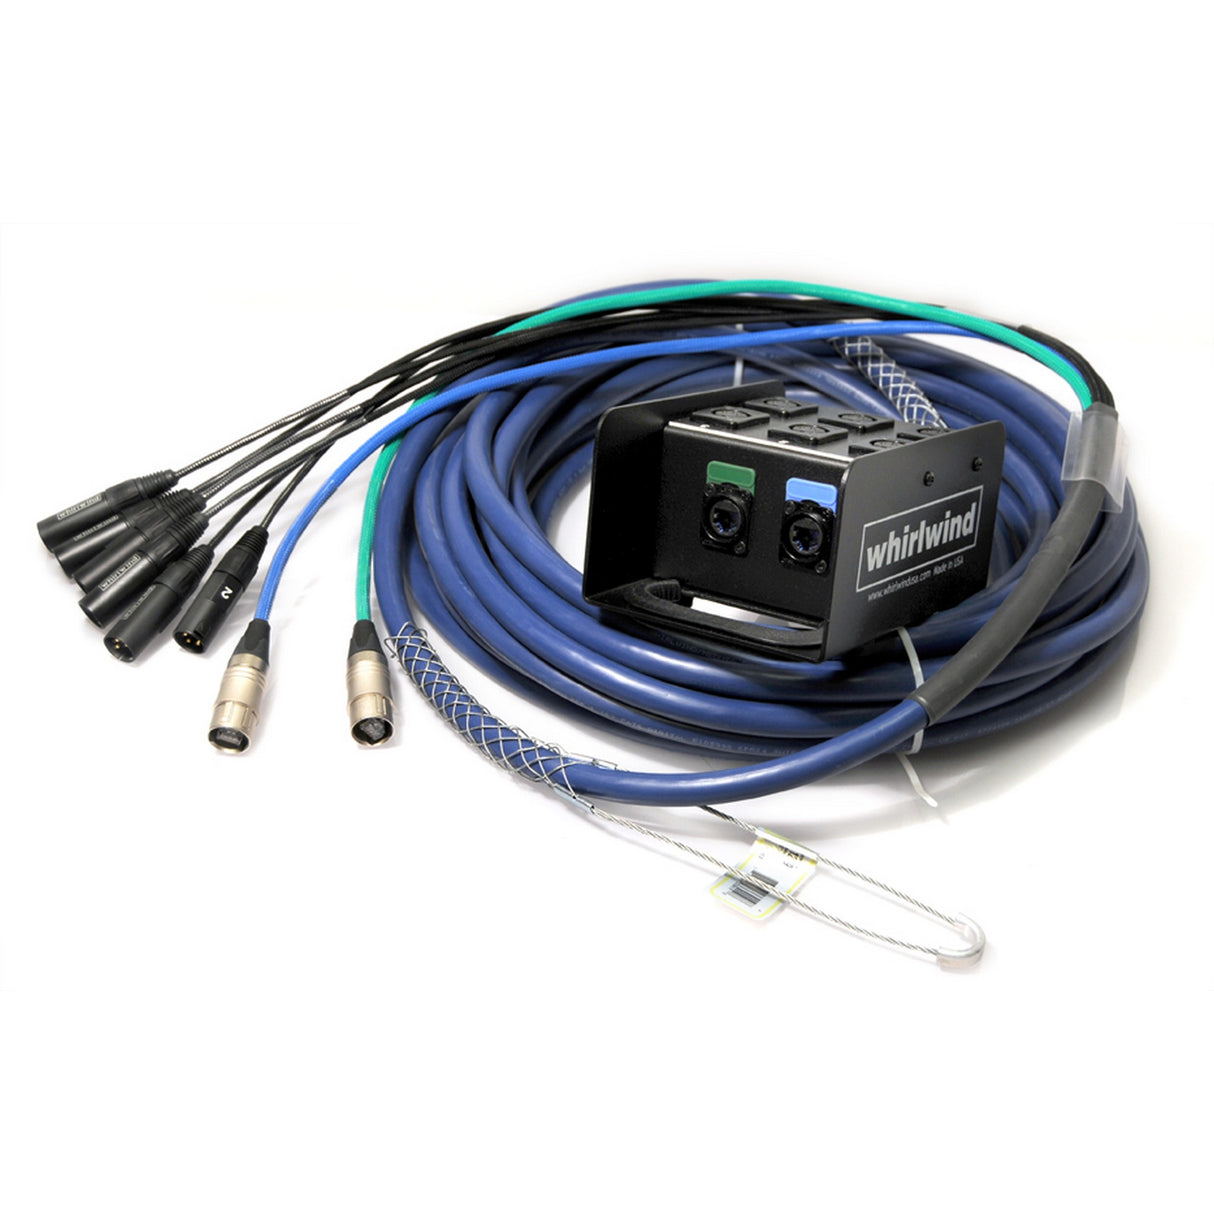 Whirlwind MD-6-2-C6-100 MEDUSA 6 XLR Inputs 2 CAT6 Lines with CAT5e Ethercon Snake Cable, 100-Feet